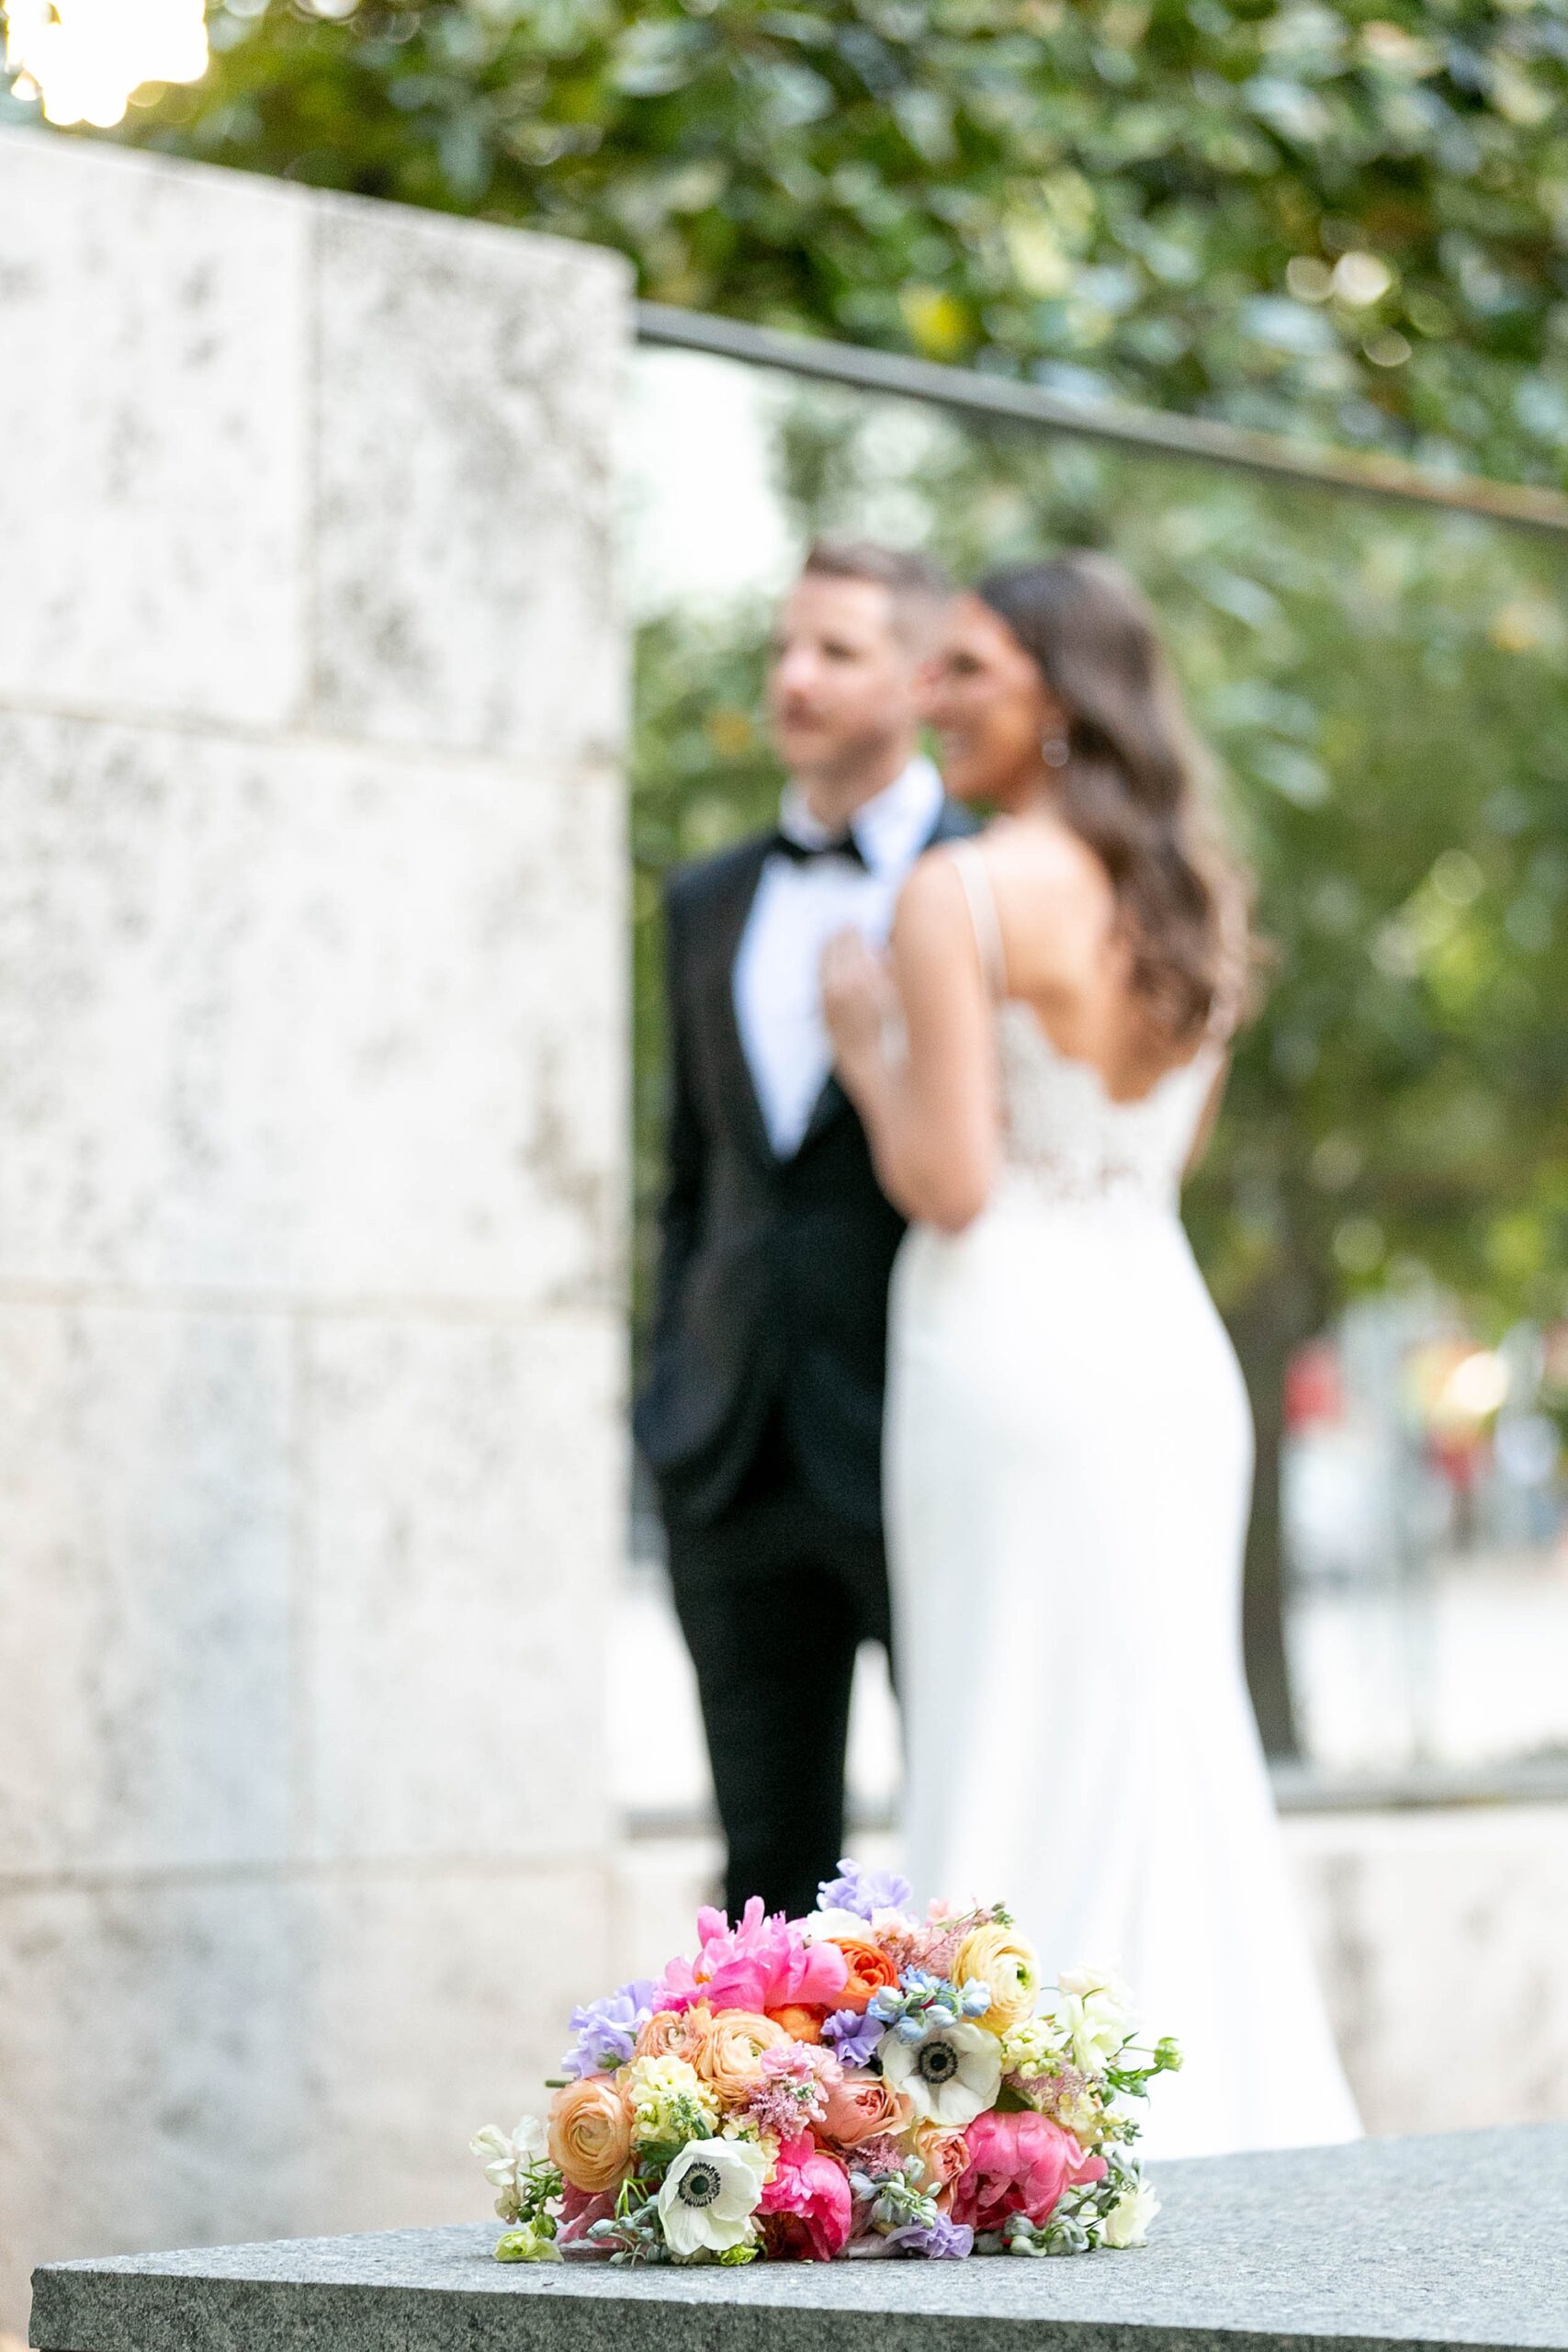 bright summer bouquet with pink and purple flowers lays at base of sculpture with newlyweds out of focus behind it 